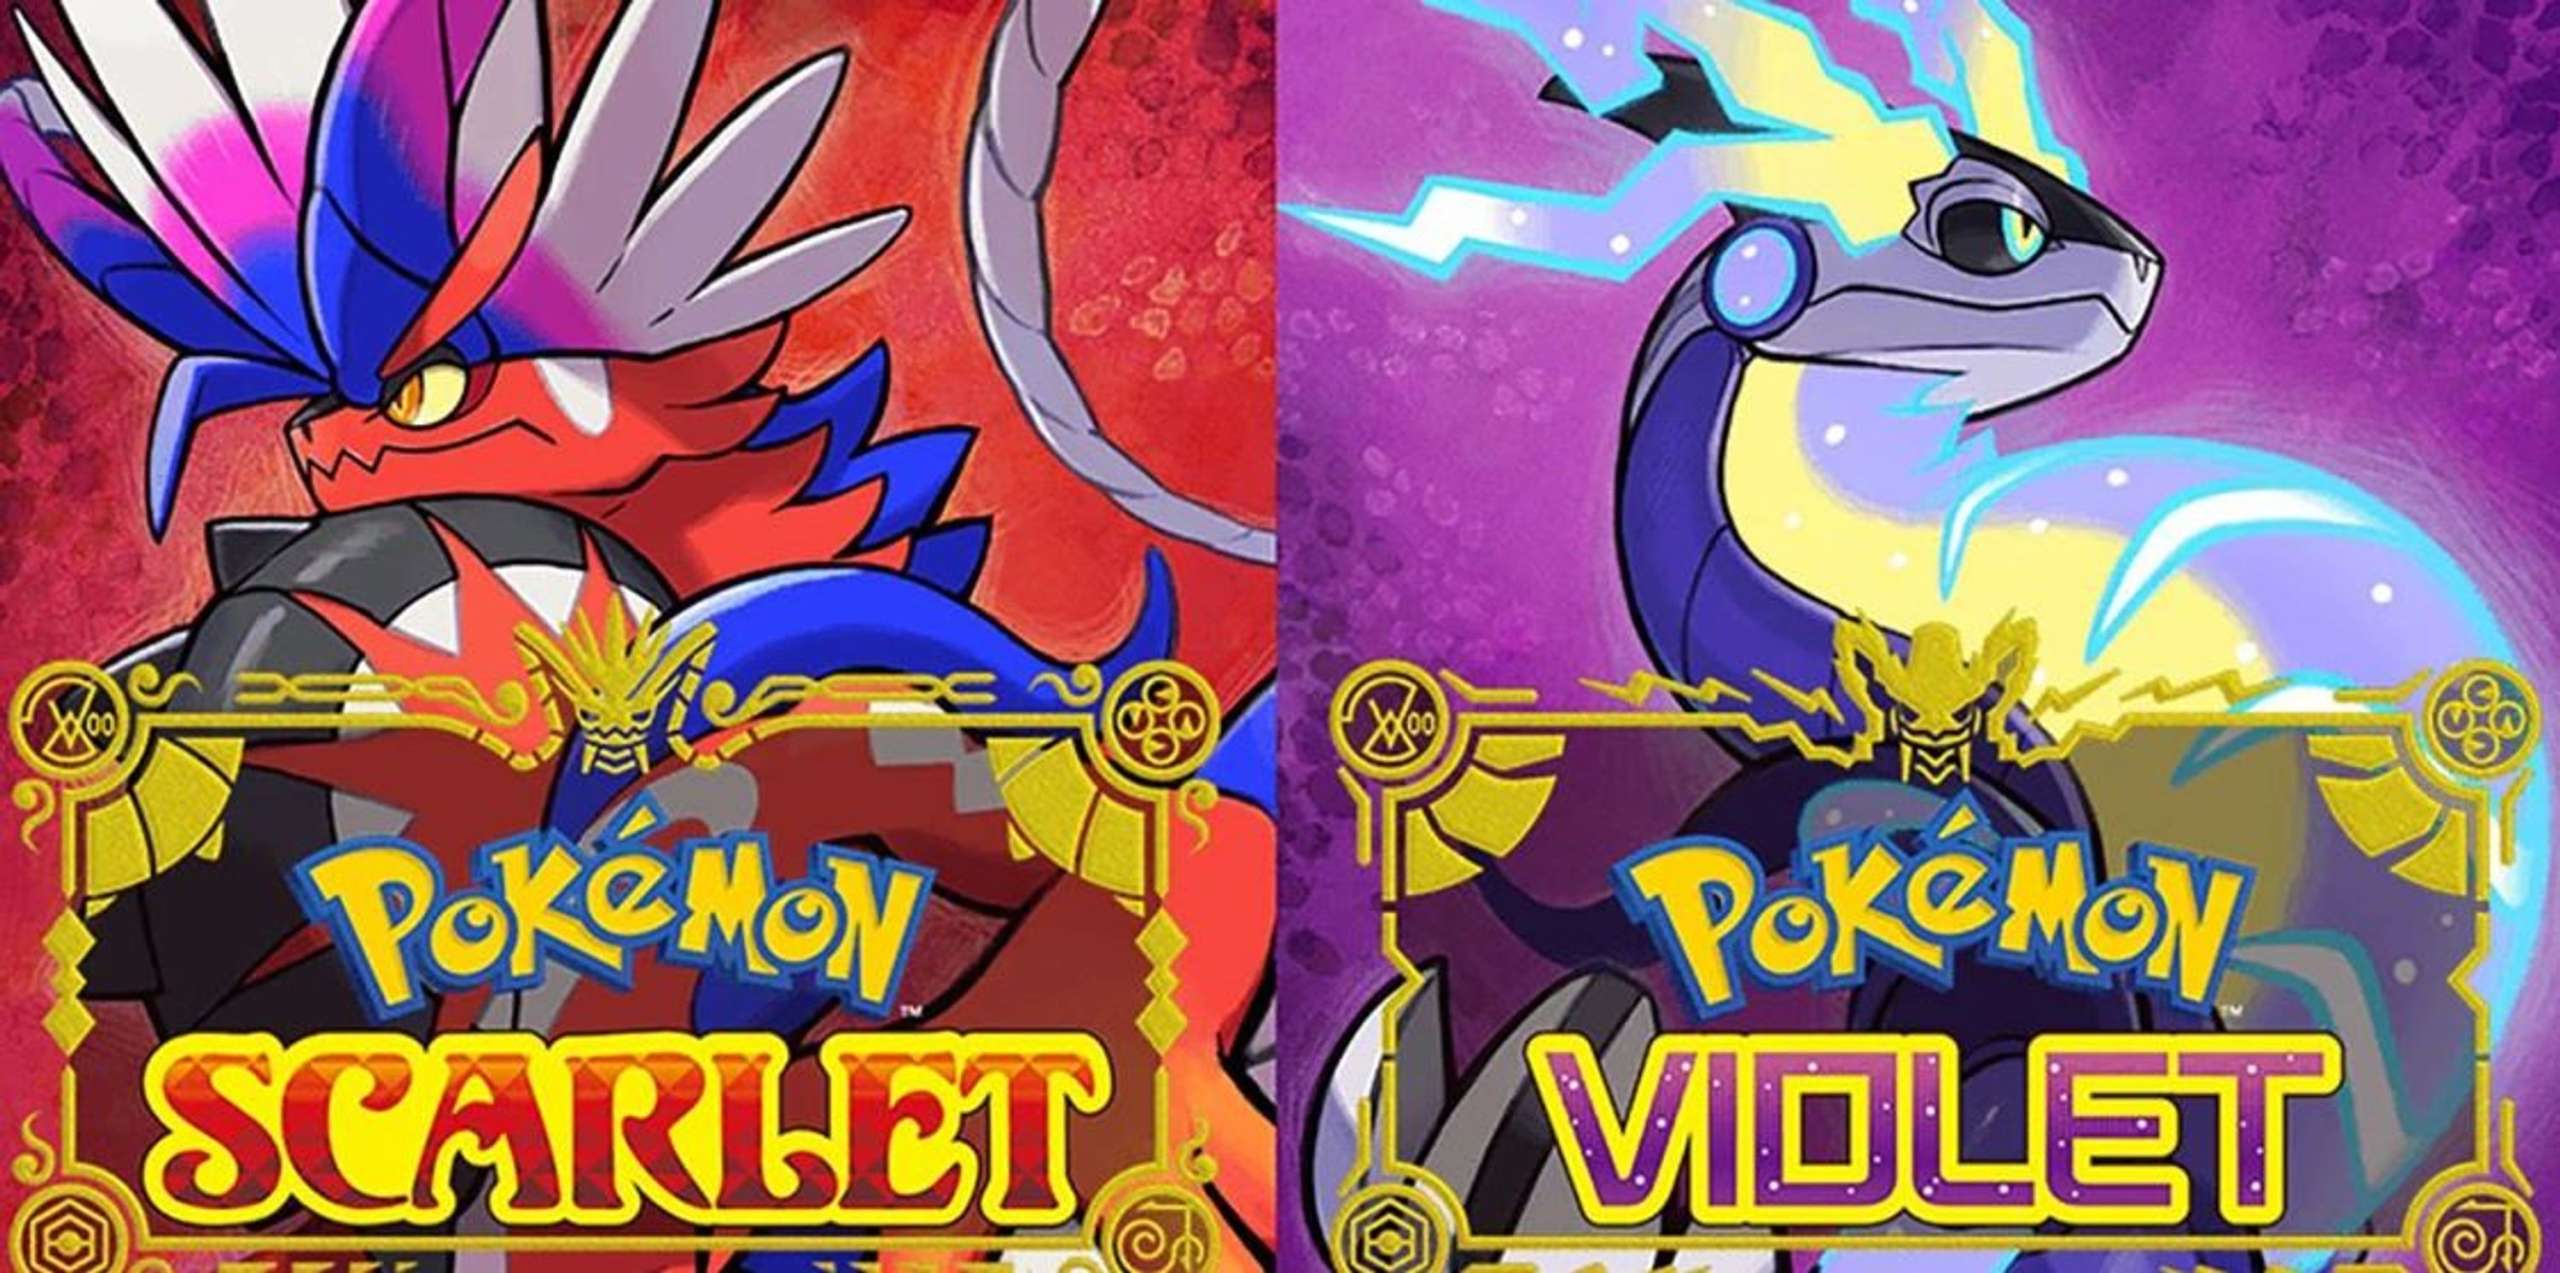 A Leak May Have Disclosed The Paradox Pokemon That Are Exclusive To Each Scarlet And Violet Version Of Pokemon, Albeit Not All Of The Secrets Have Been Exposed